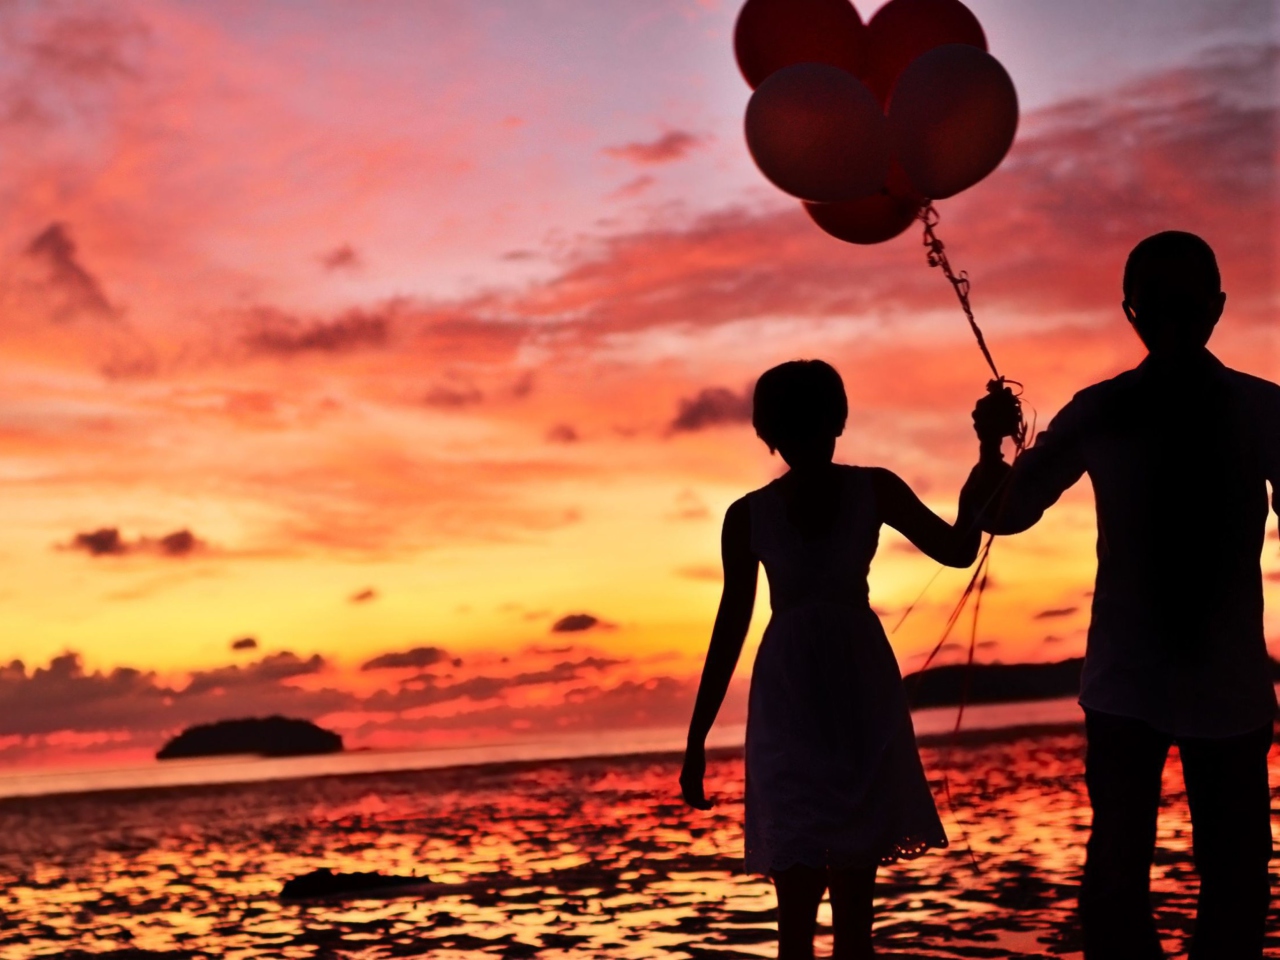 Обои Couple With Balloons Silhouette At Sunset 1280x960